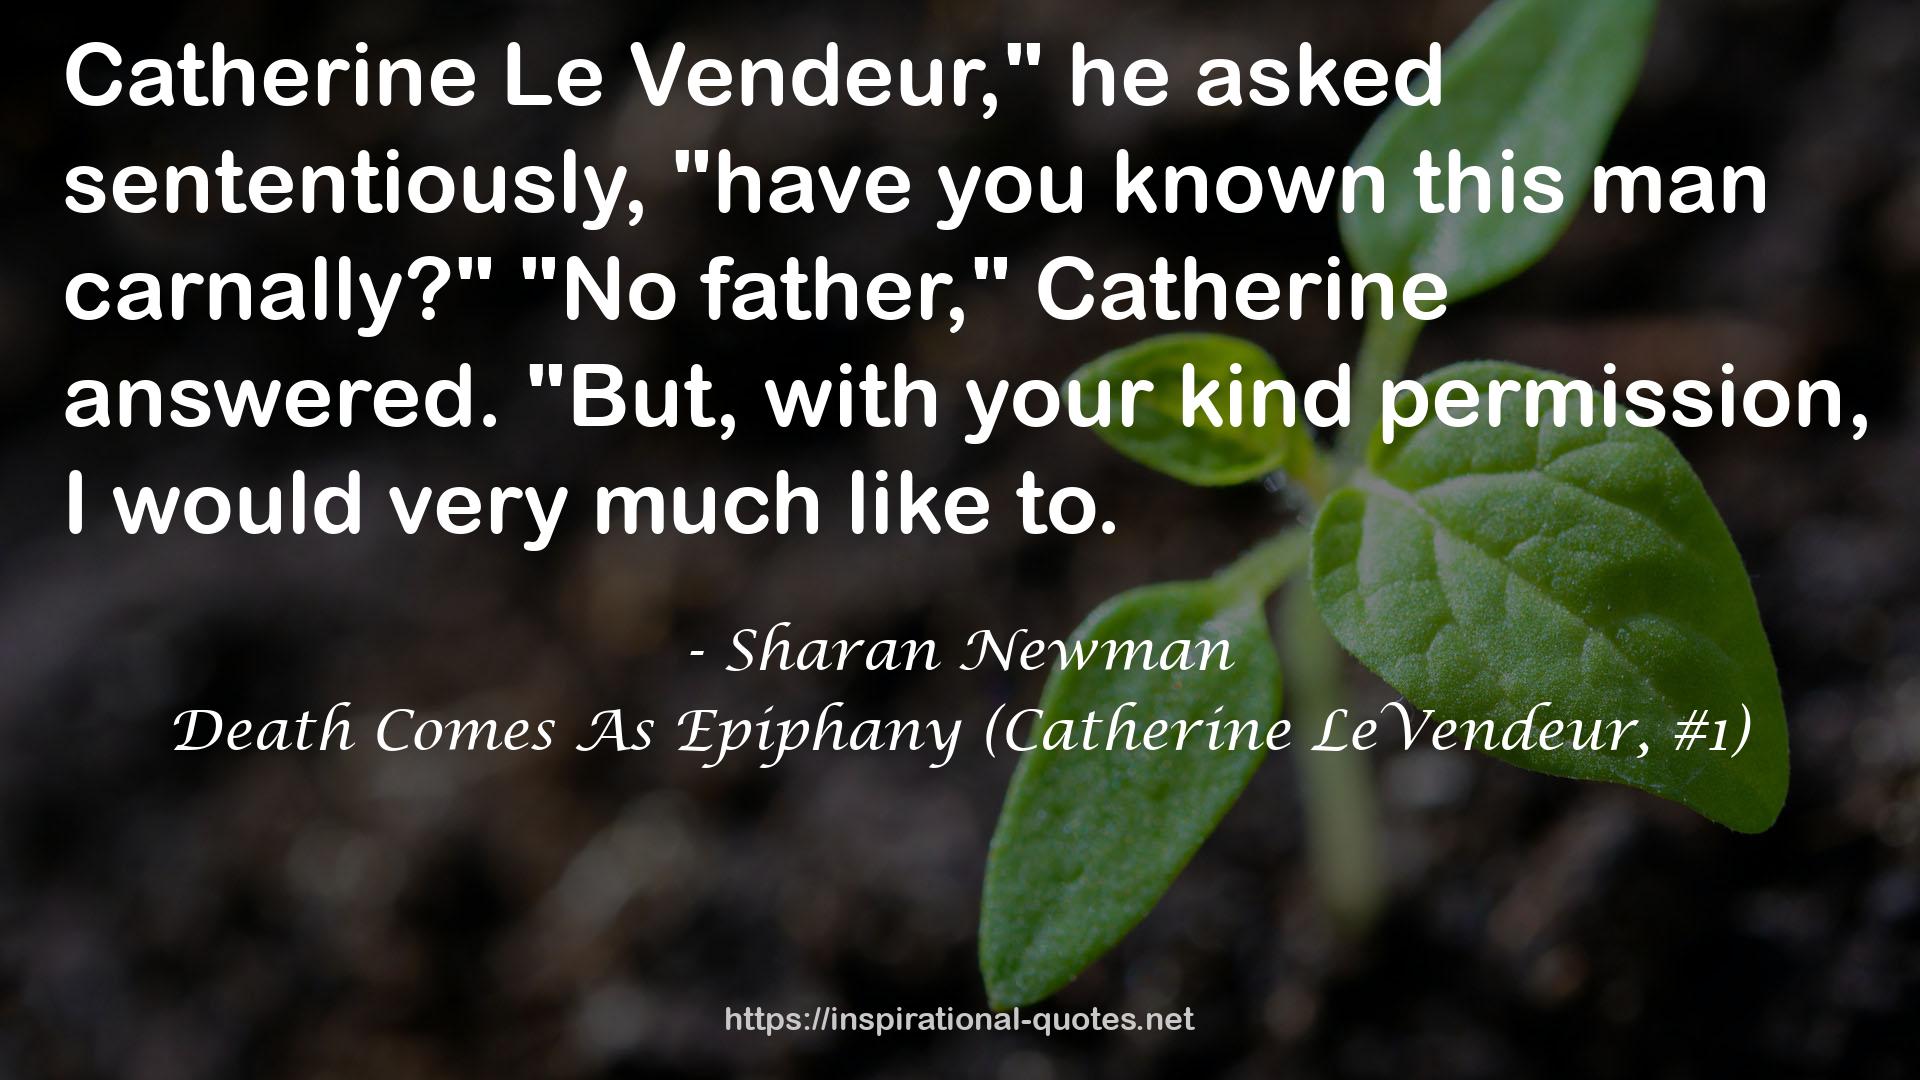 Death Comes As Epiphany (Catherine LeVendeur, #1) QUOTES